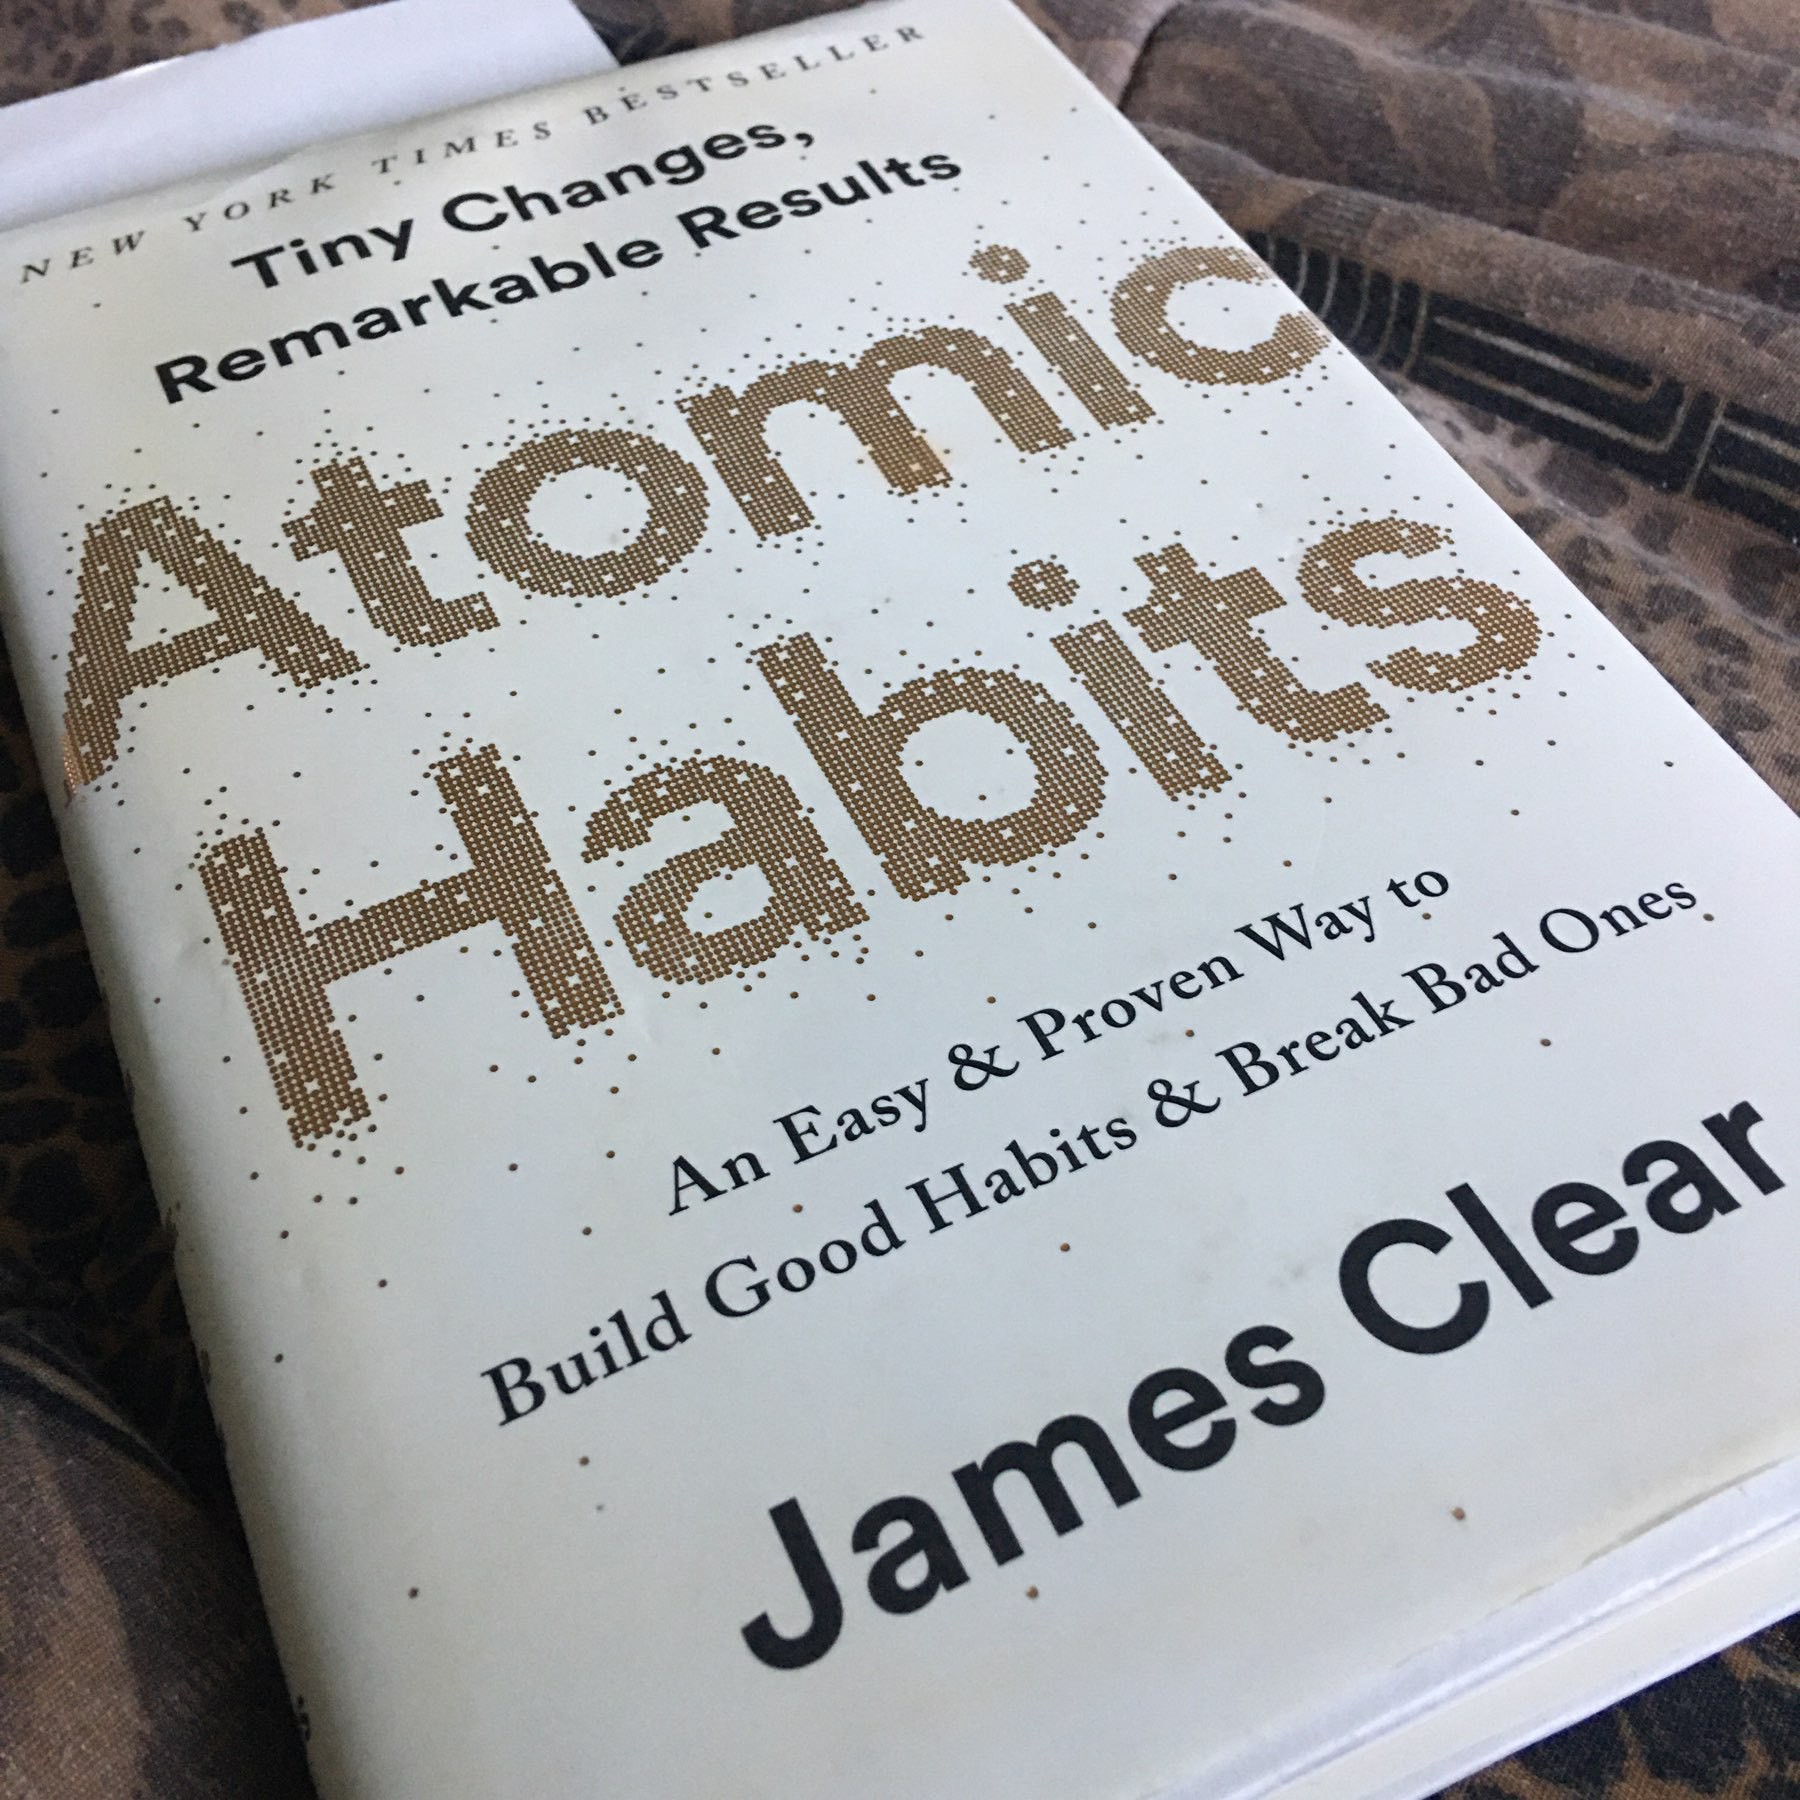 Atomic Habits by James Clear.